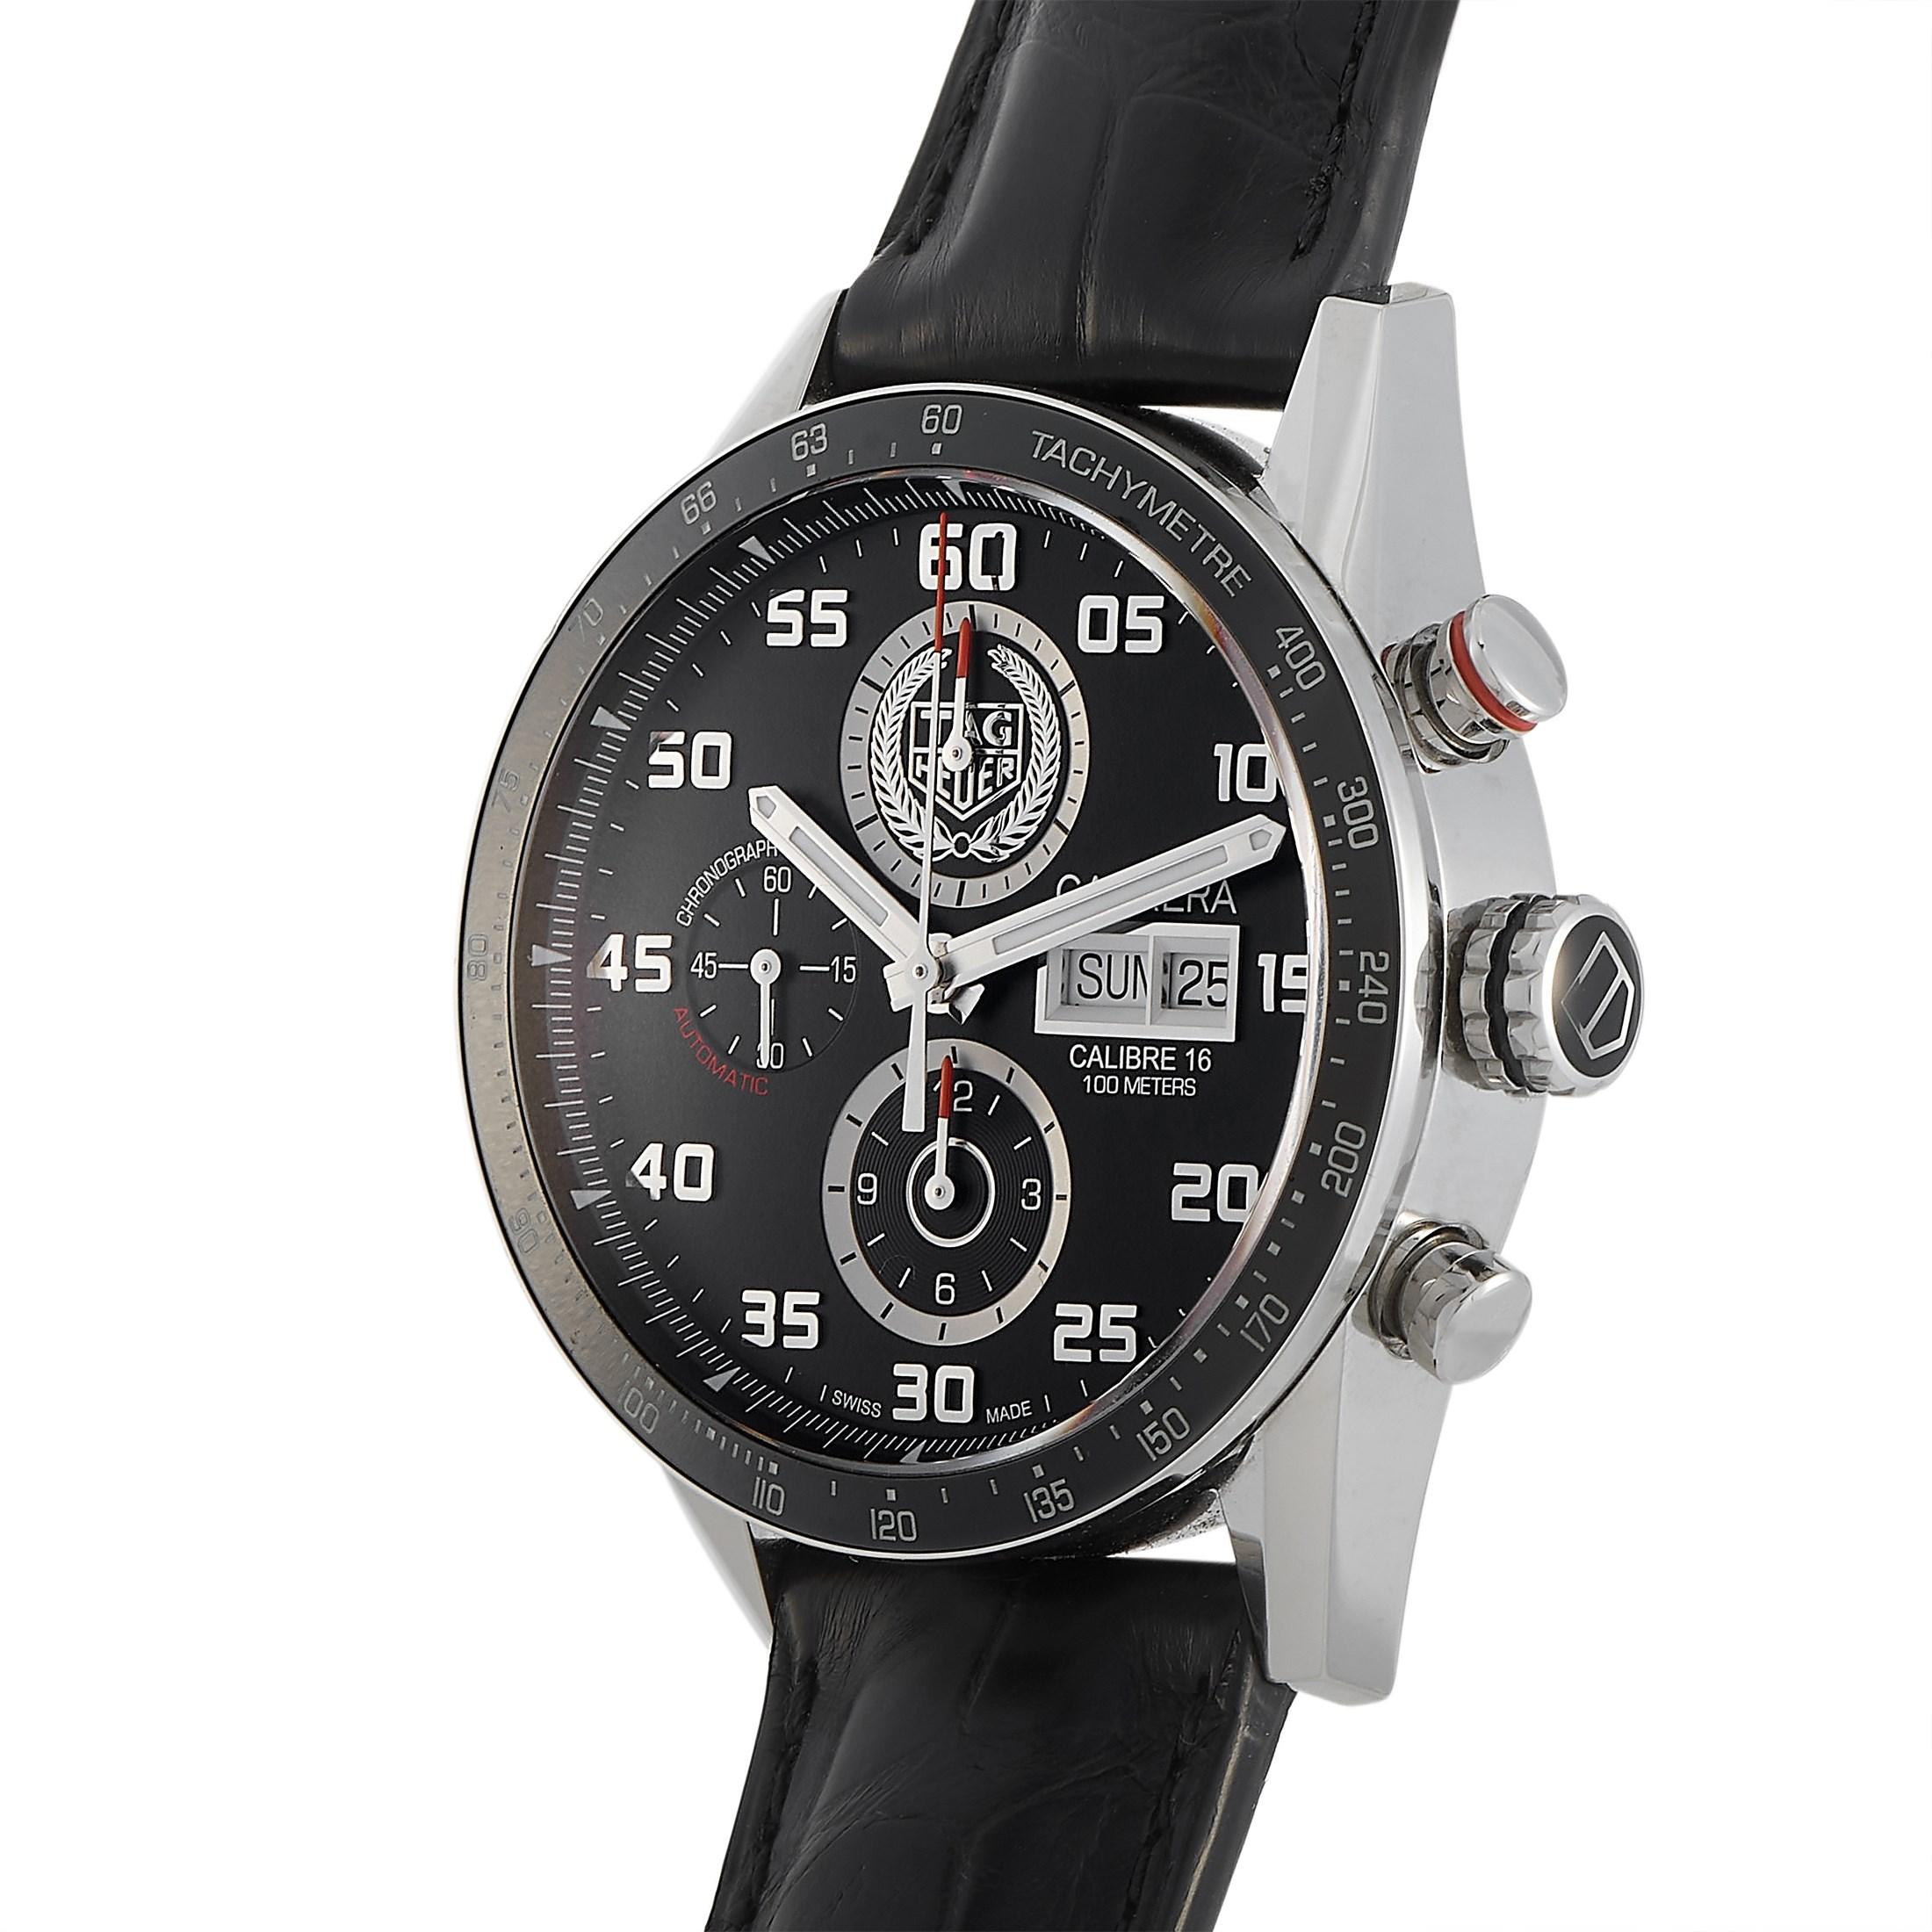 A very special watch model that you can now own. The TAG Heuer Carrera CV2AIT.BA0738 is an Ambassador Special Edition watch designed with a 42mm round stainless steel case, a black ceramic bezel with a tachymeter scale, and a black dial with